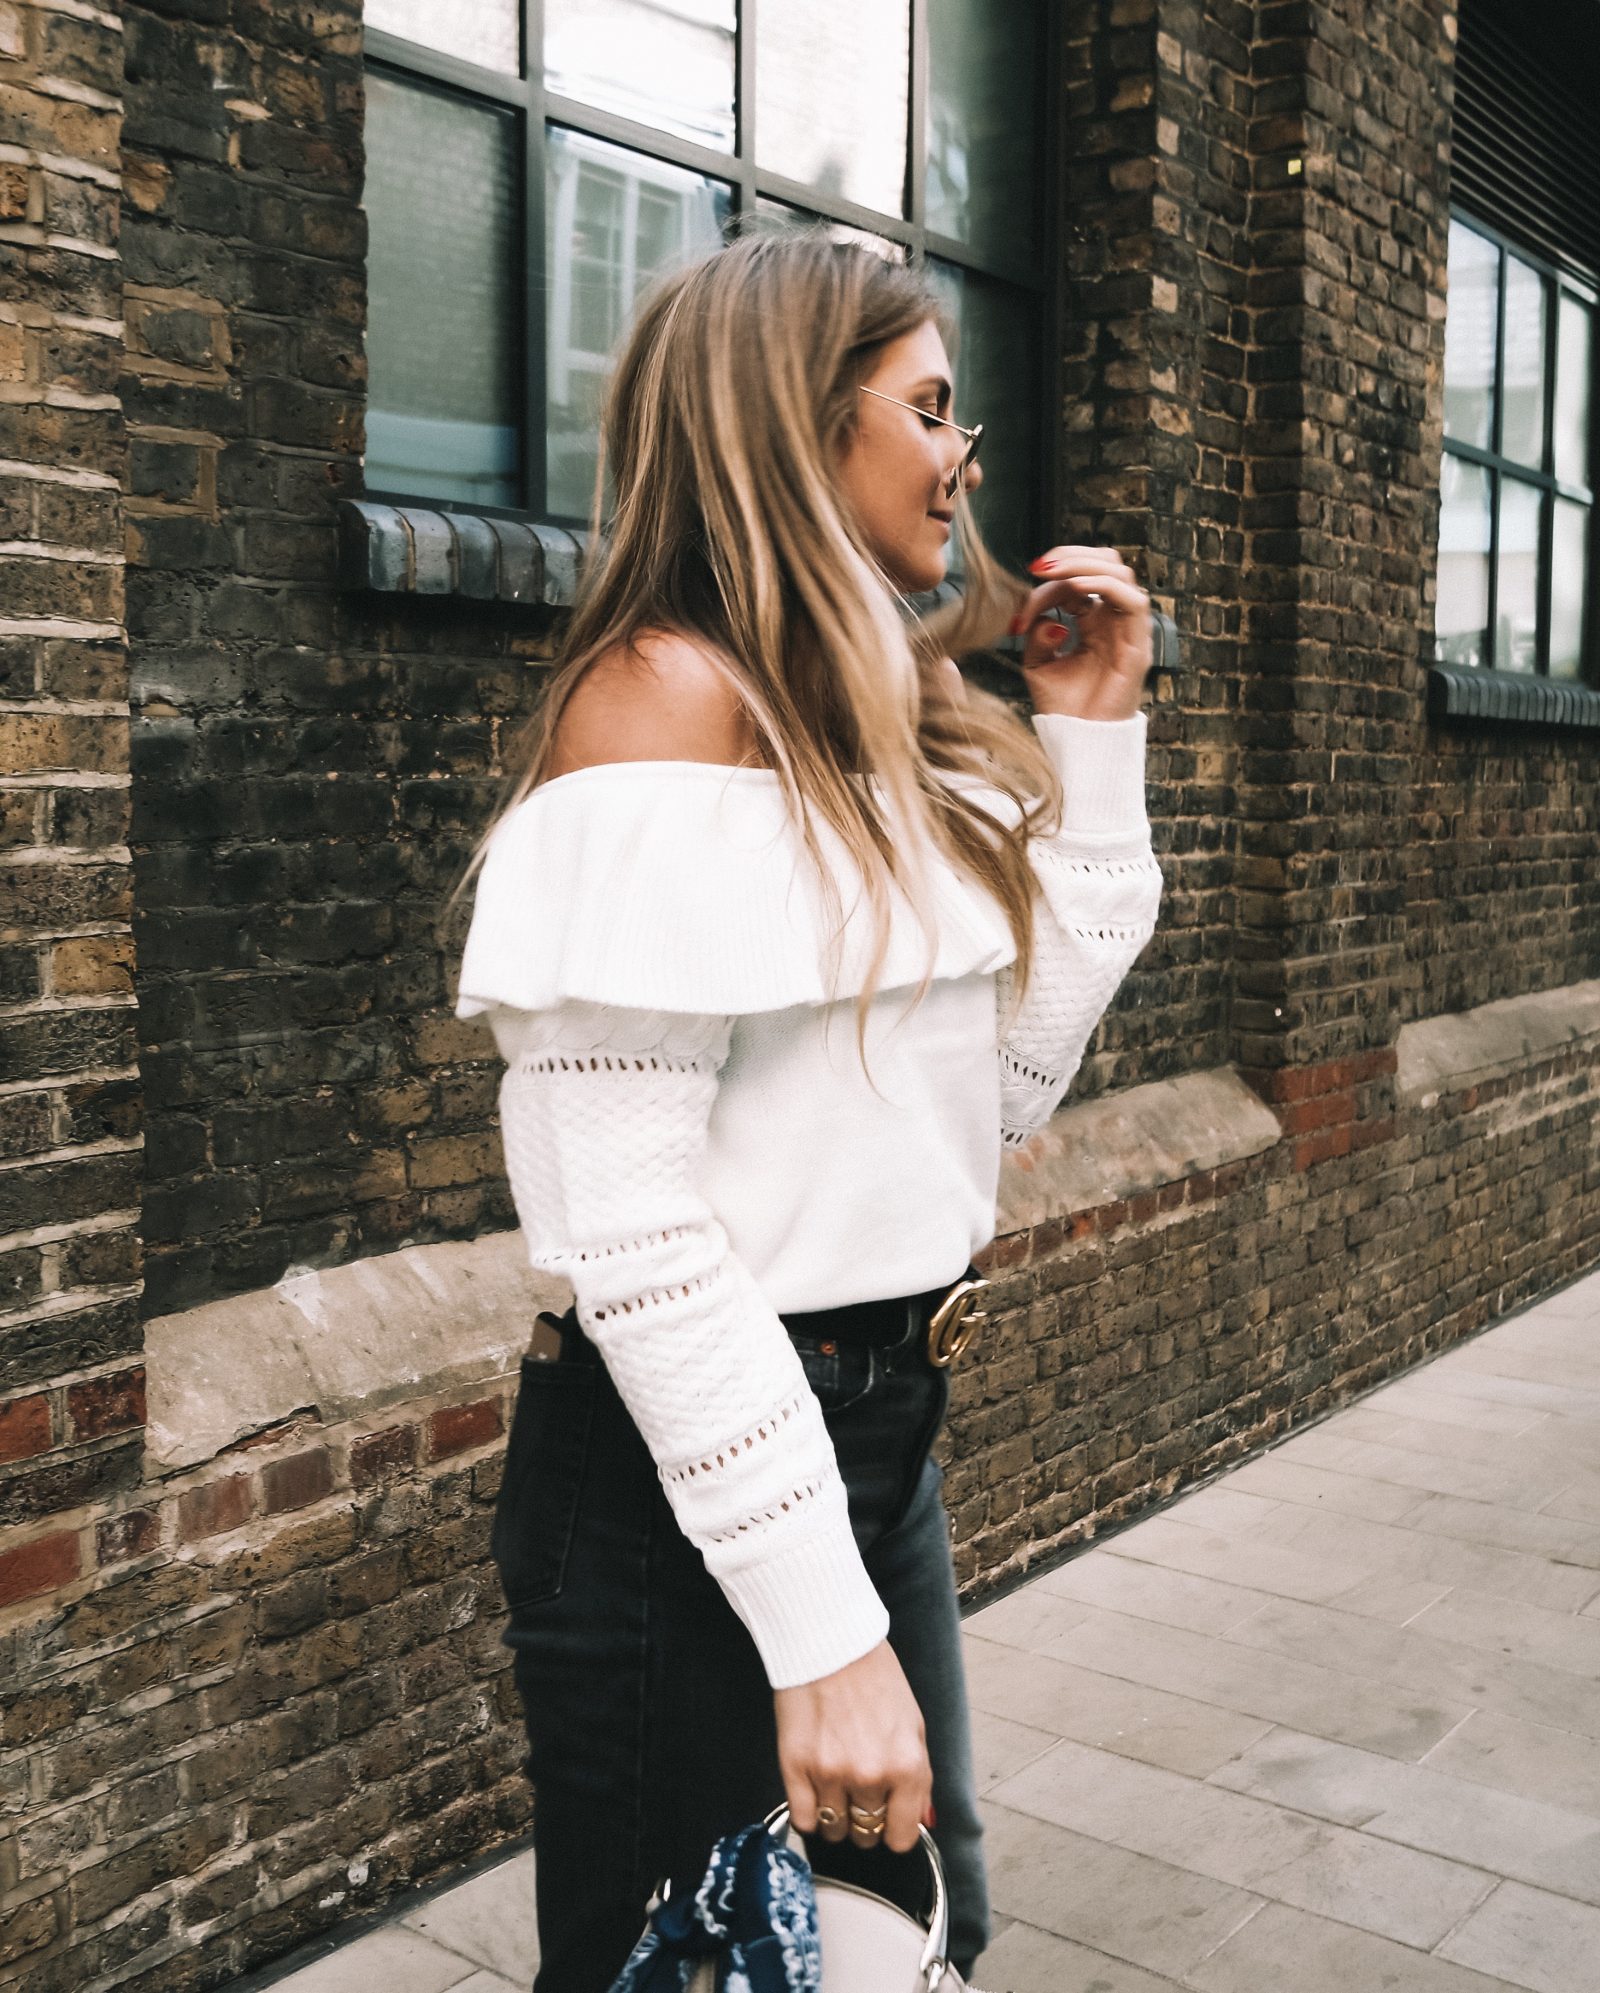 Moving To London - Lulus Outfit - Autumn Style - Sinead Crowe